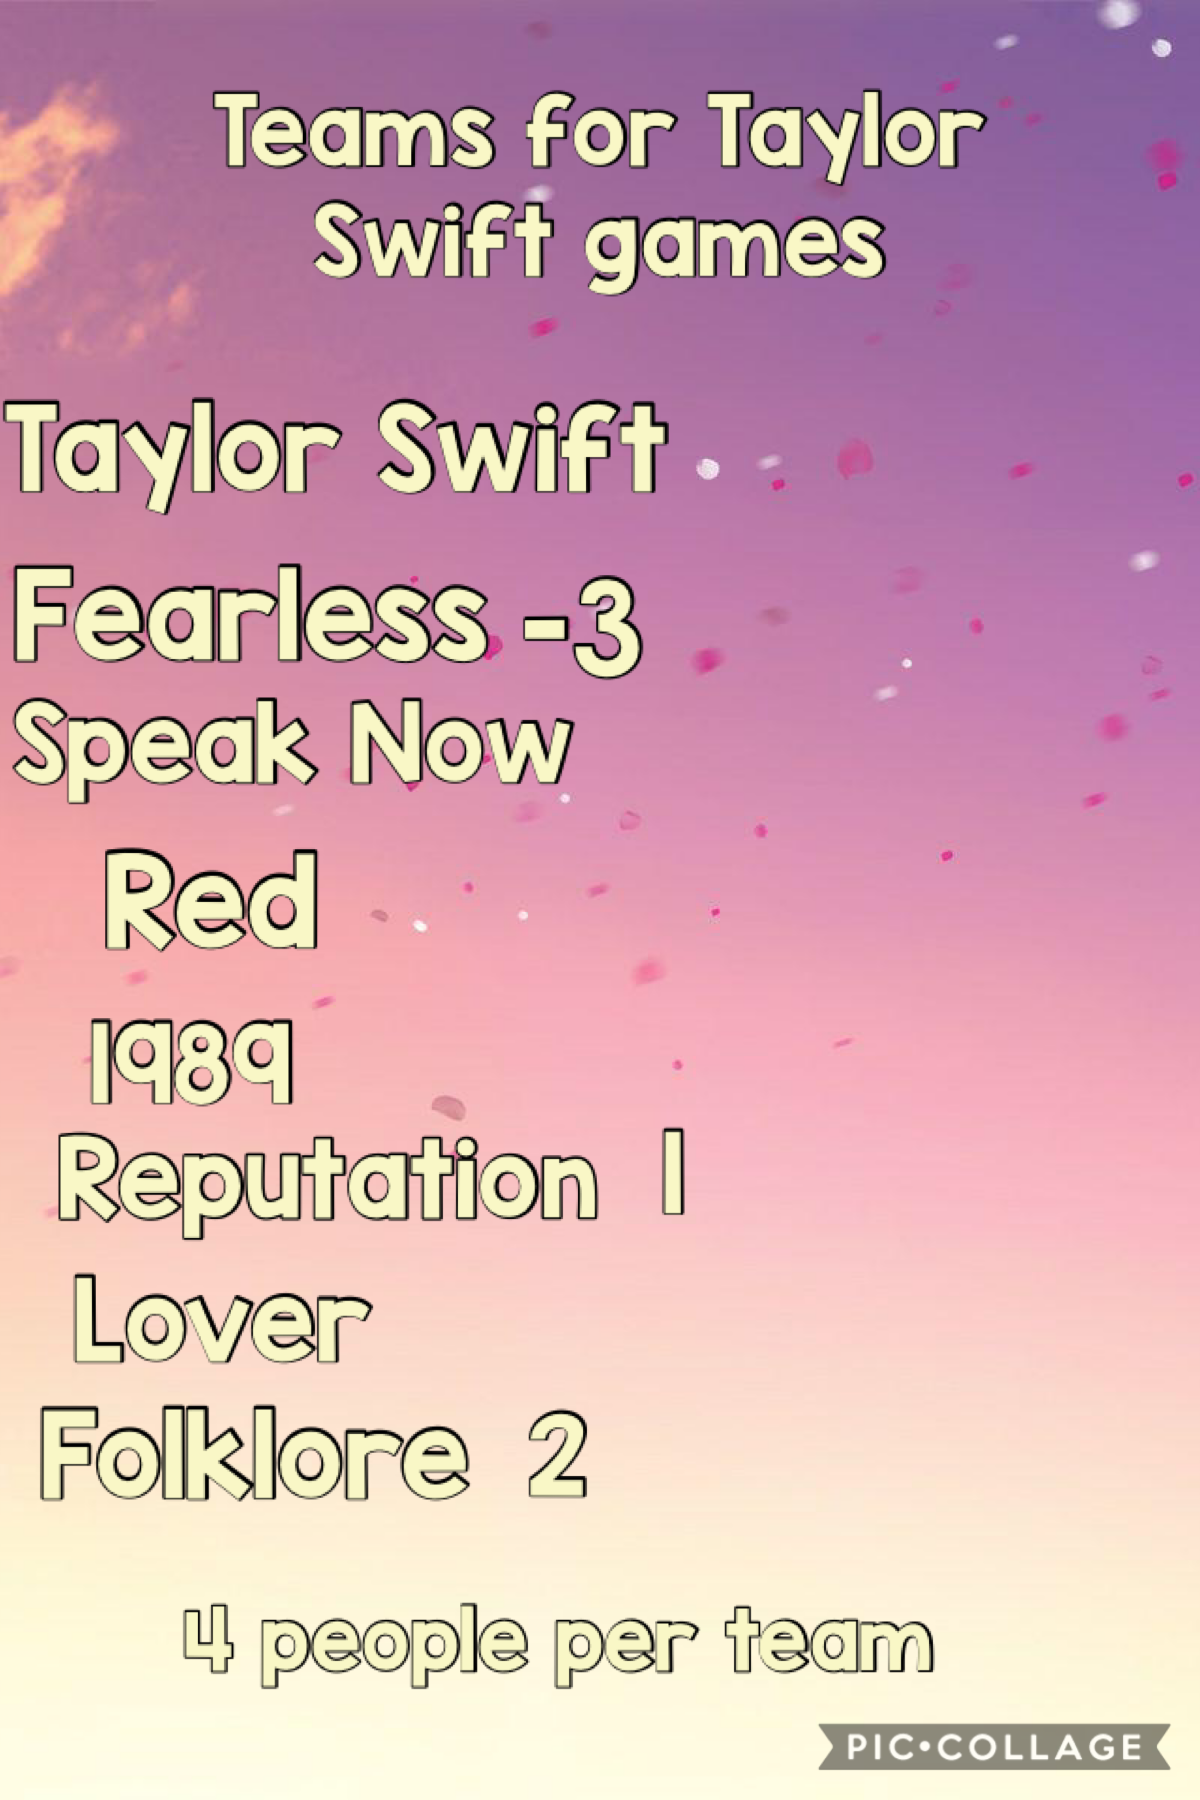 Team update for the Taylor Swift games